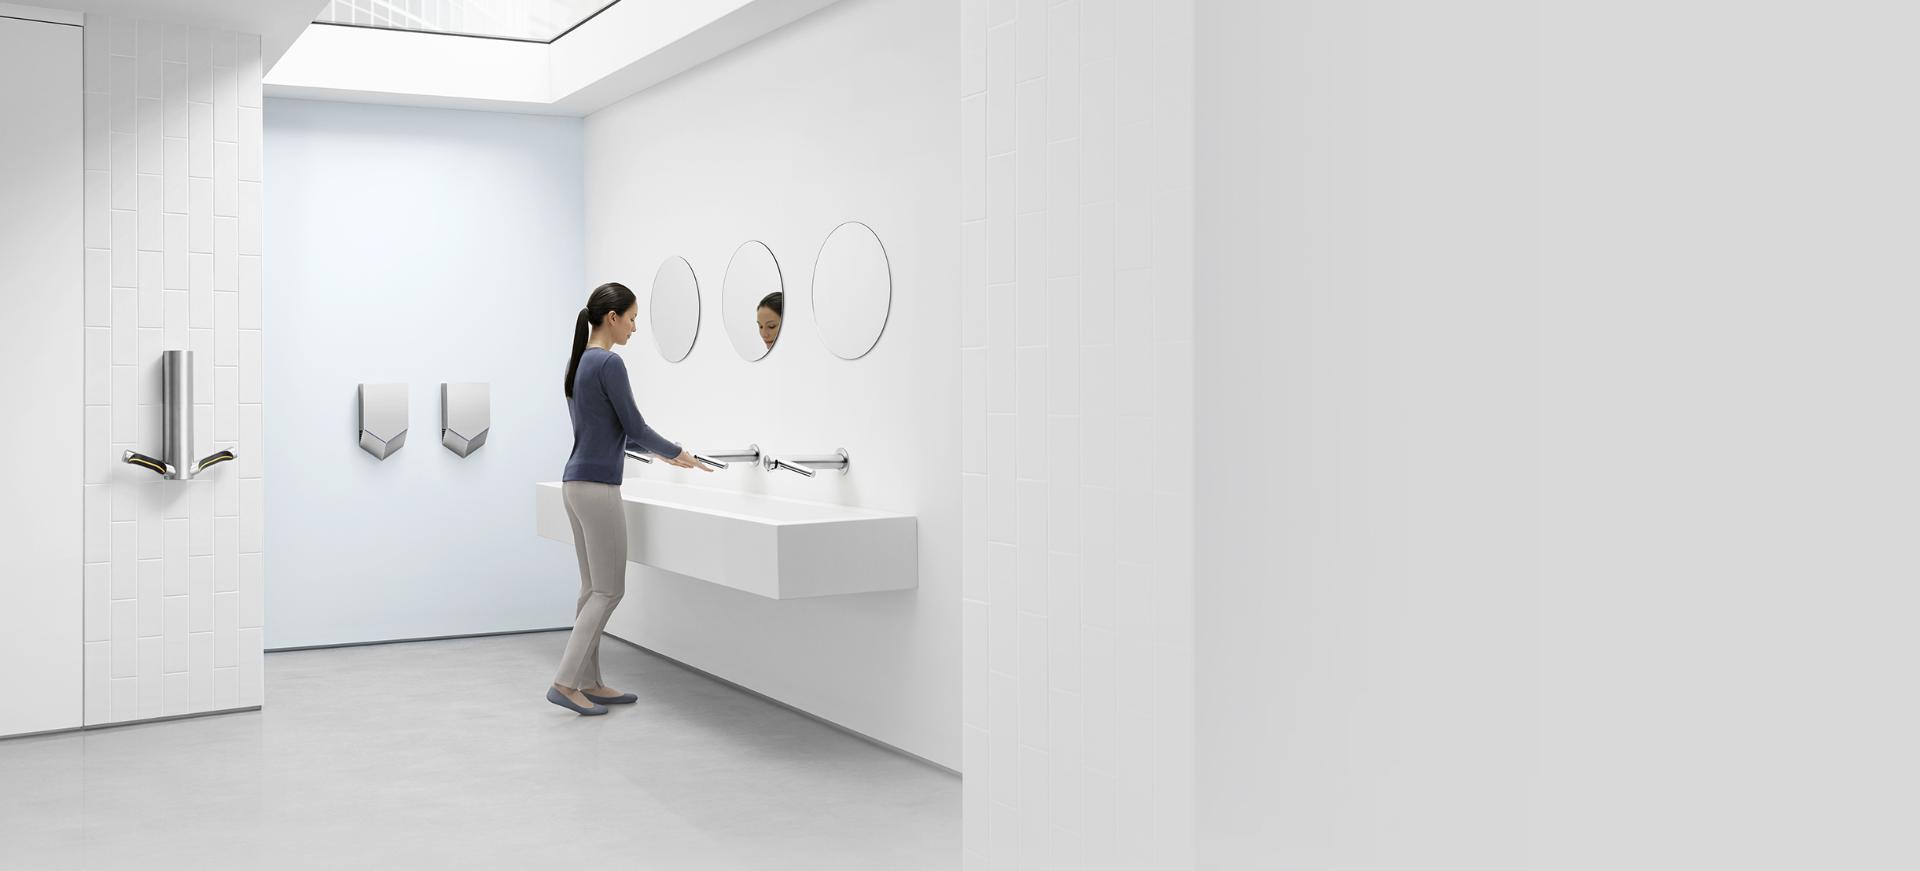 Woman drying hands with Dyson Airblade Wash+Dry hand dryer